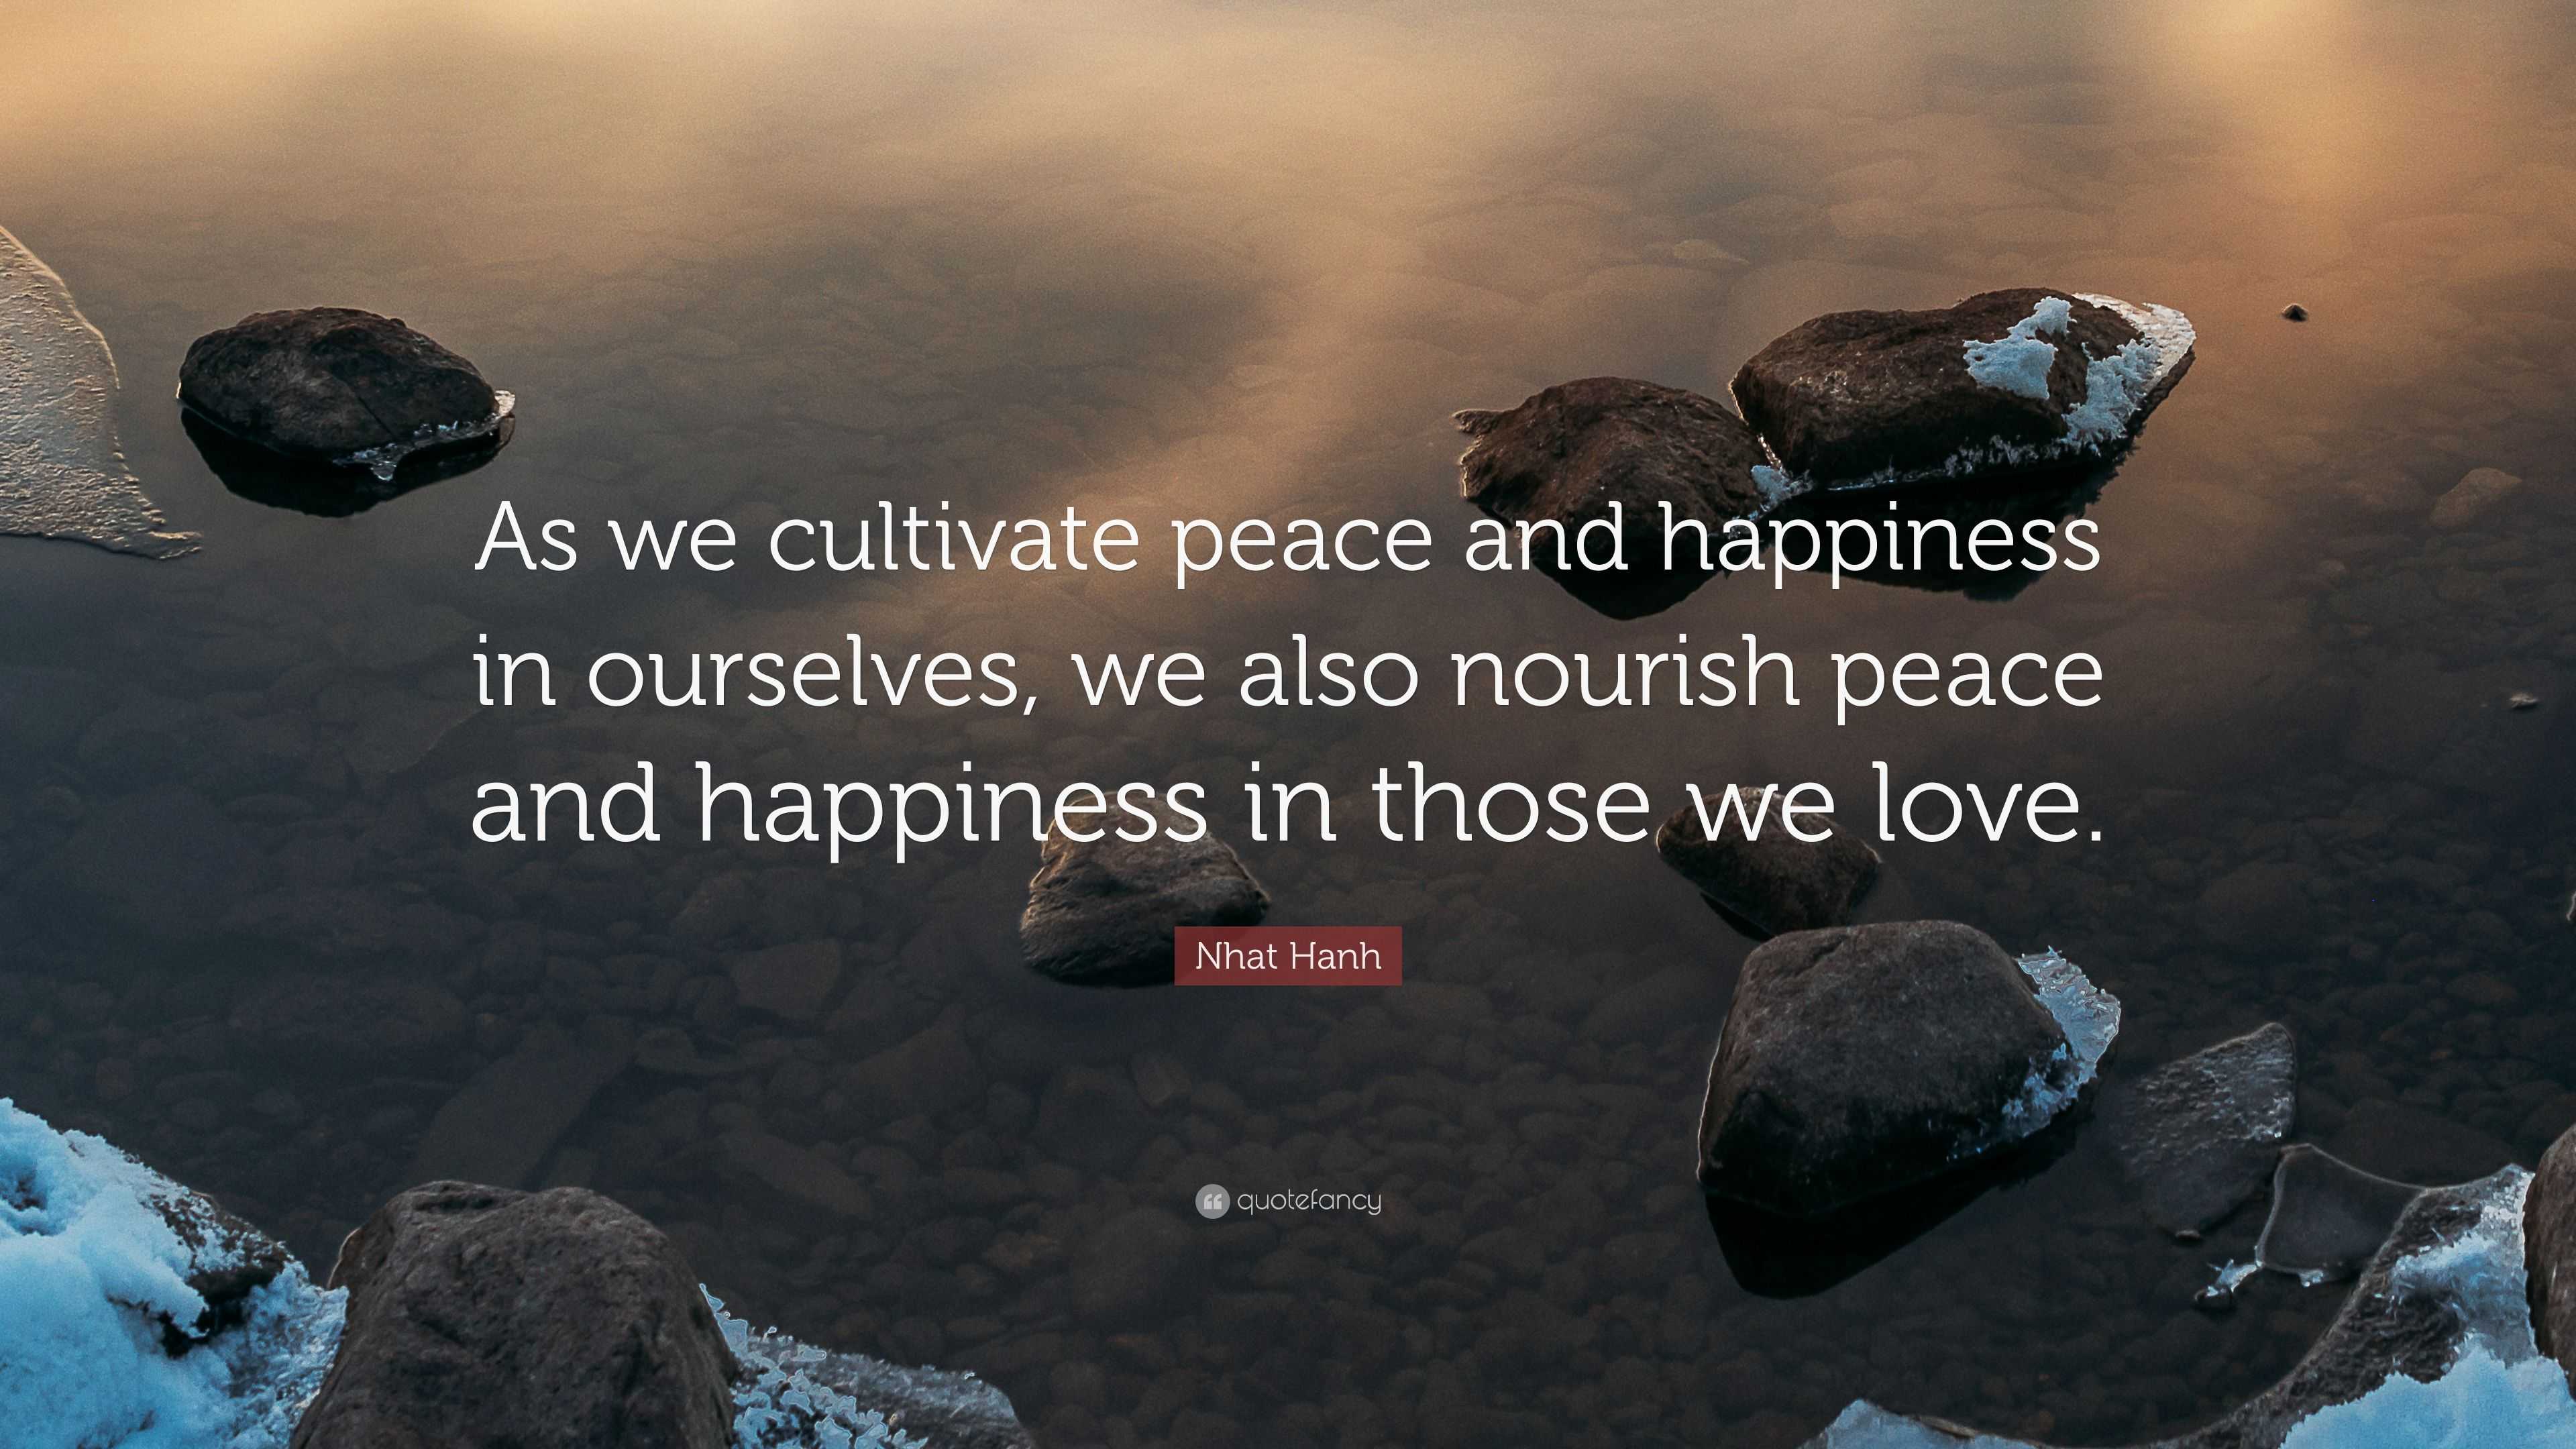 Nhat Hanh Quote: “As we cultivate peace and happiness in ourselves, we ...